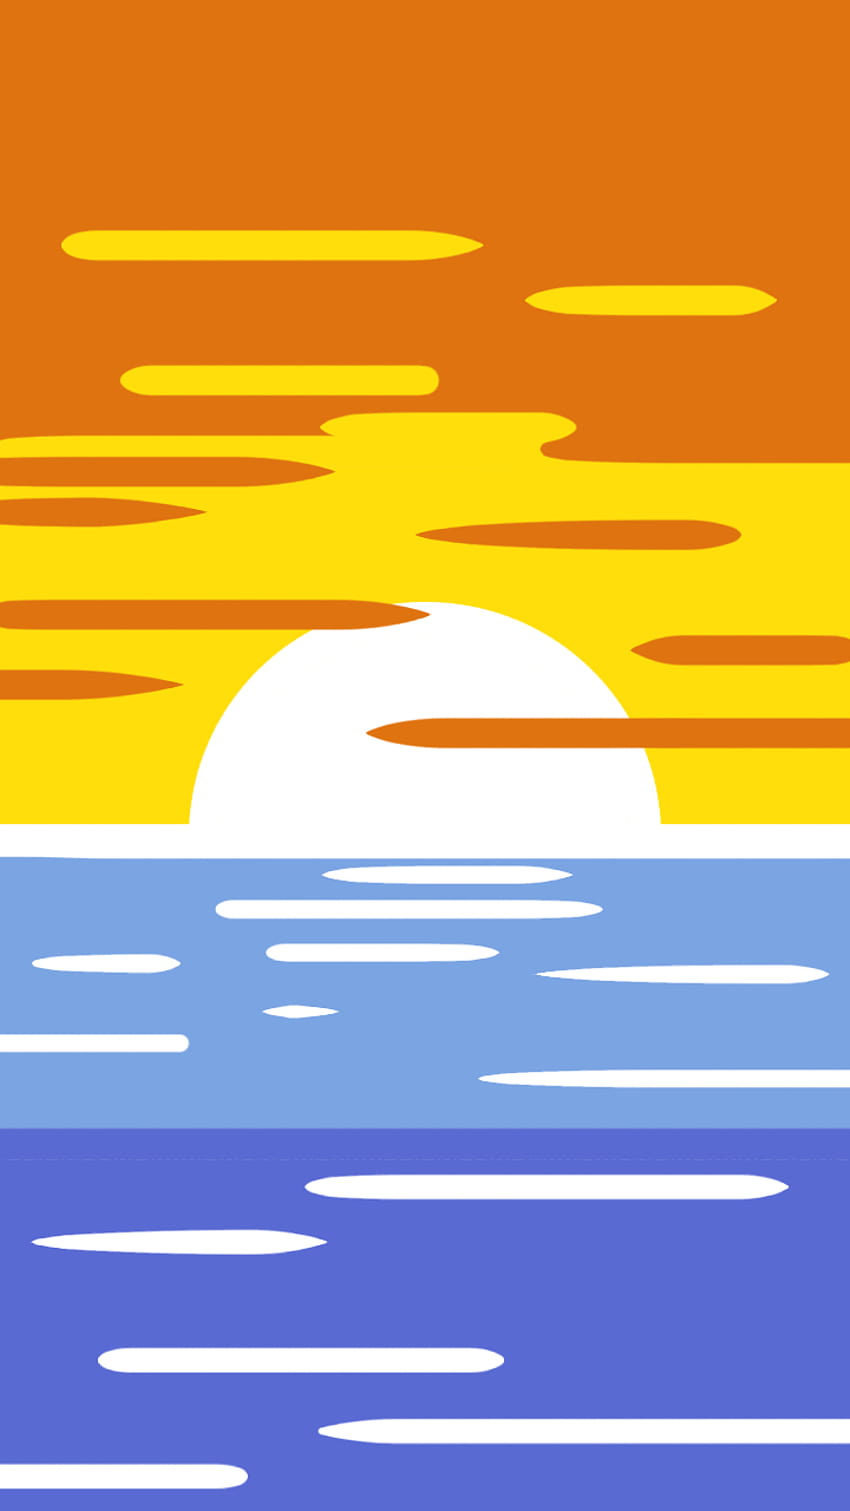 I realized the aroace flag looked like a sunset over the ocean so I tried making a for it. I'm terrible at sunsets and I never do this simplistic of drawings HD phone wallpaper